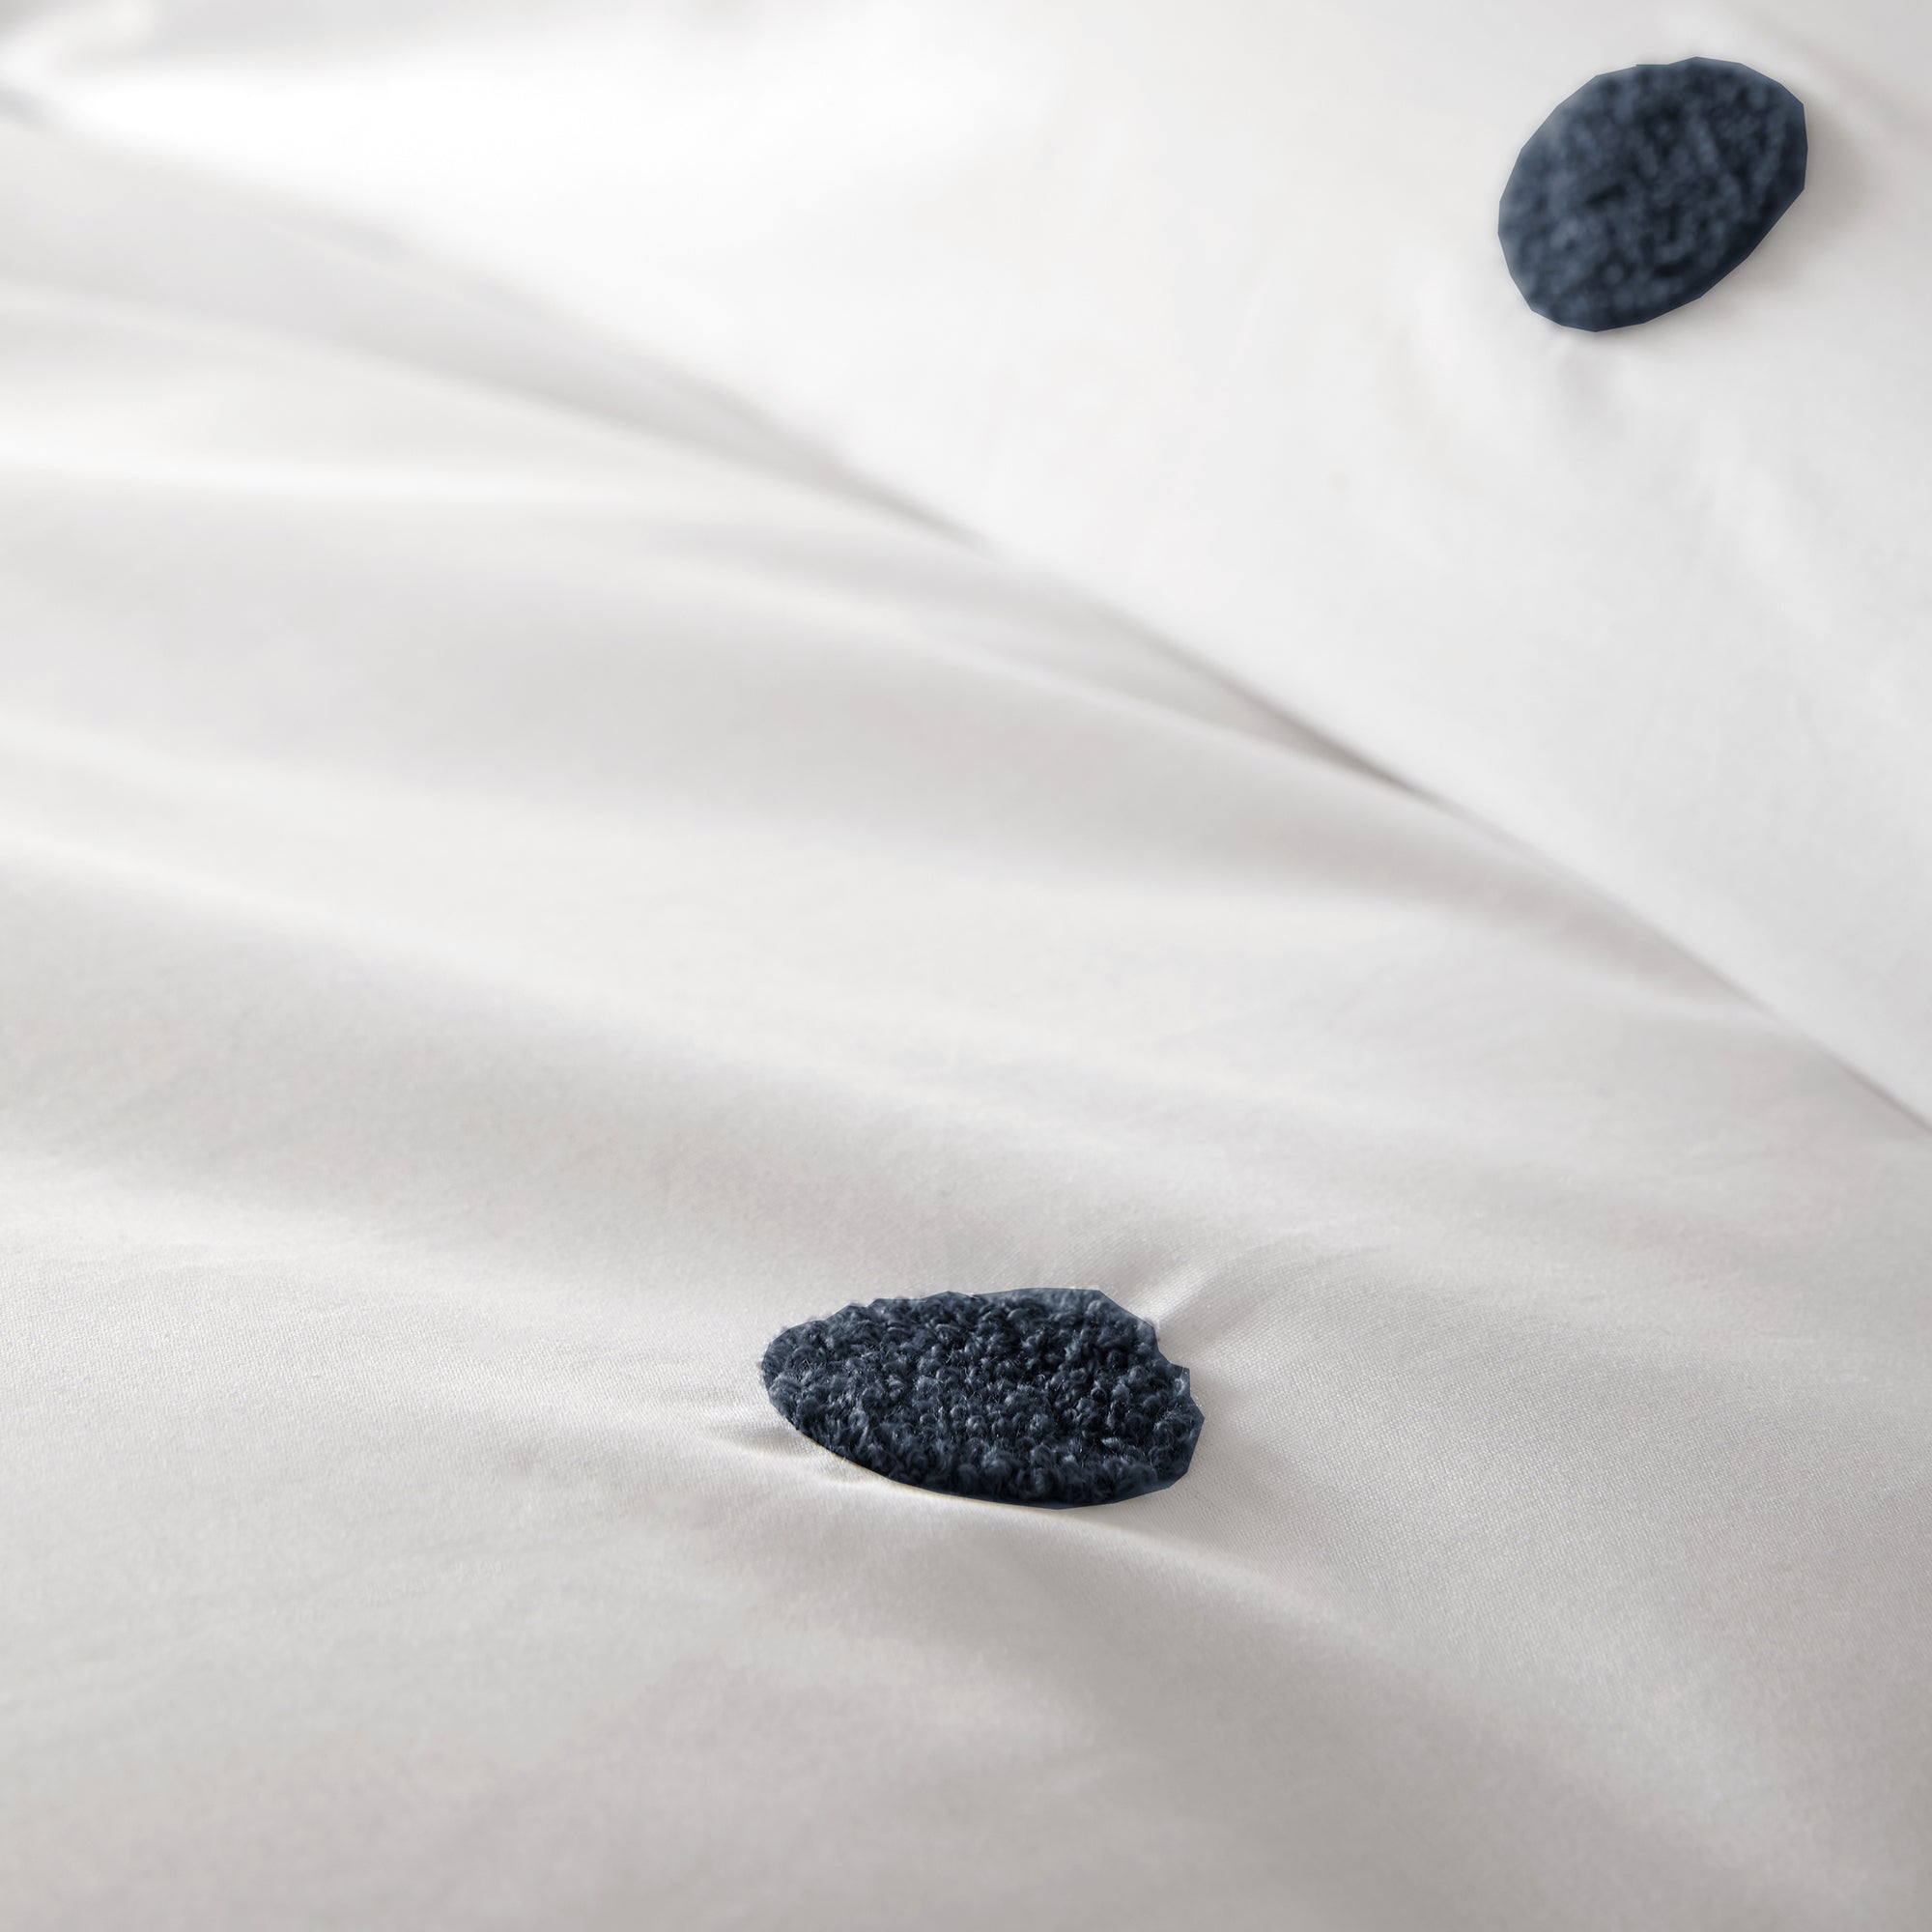 Dot Garden - 100% Cotton Duvet Cover Set in White & Navy - by Appletree Boutique